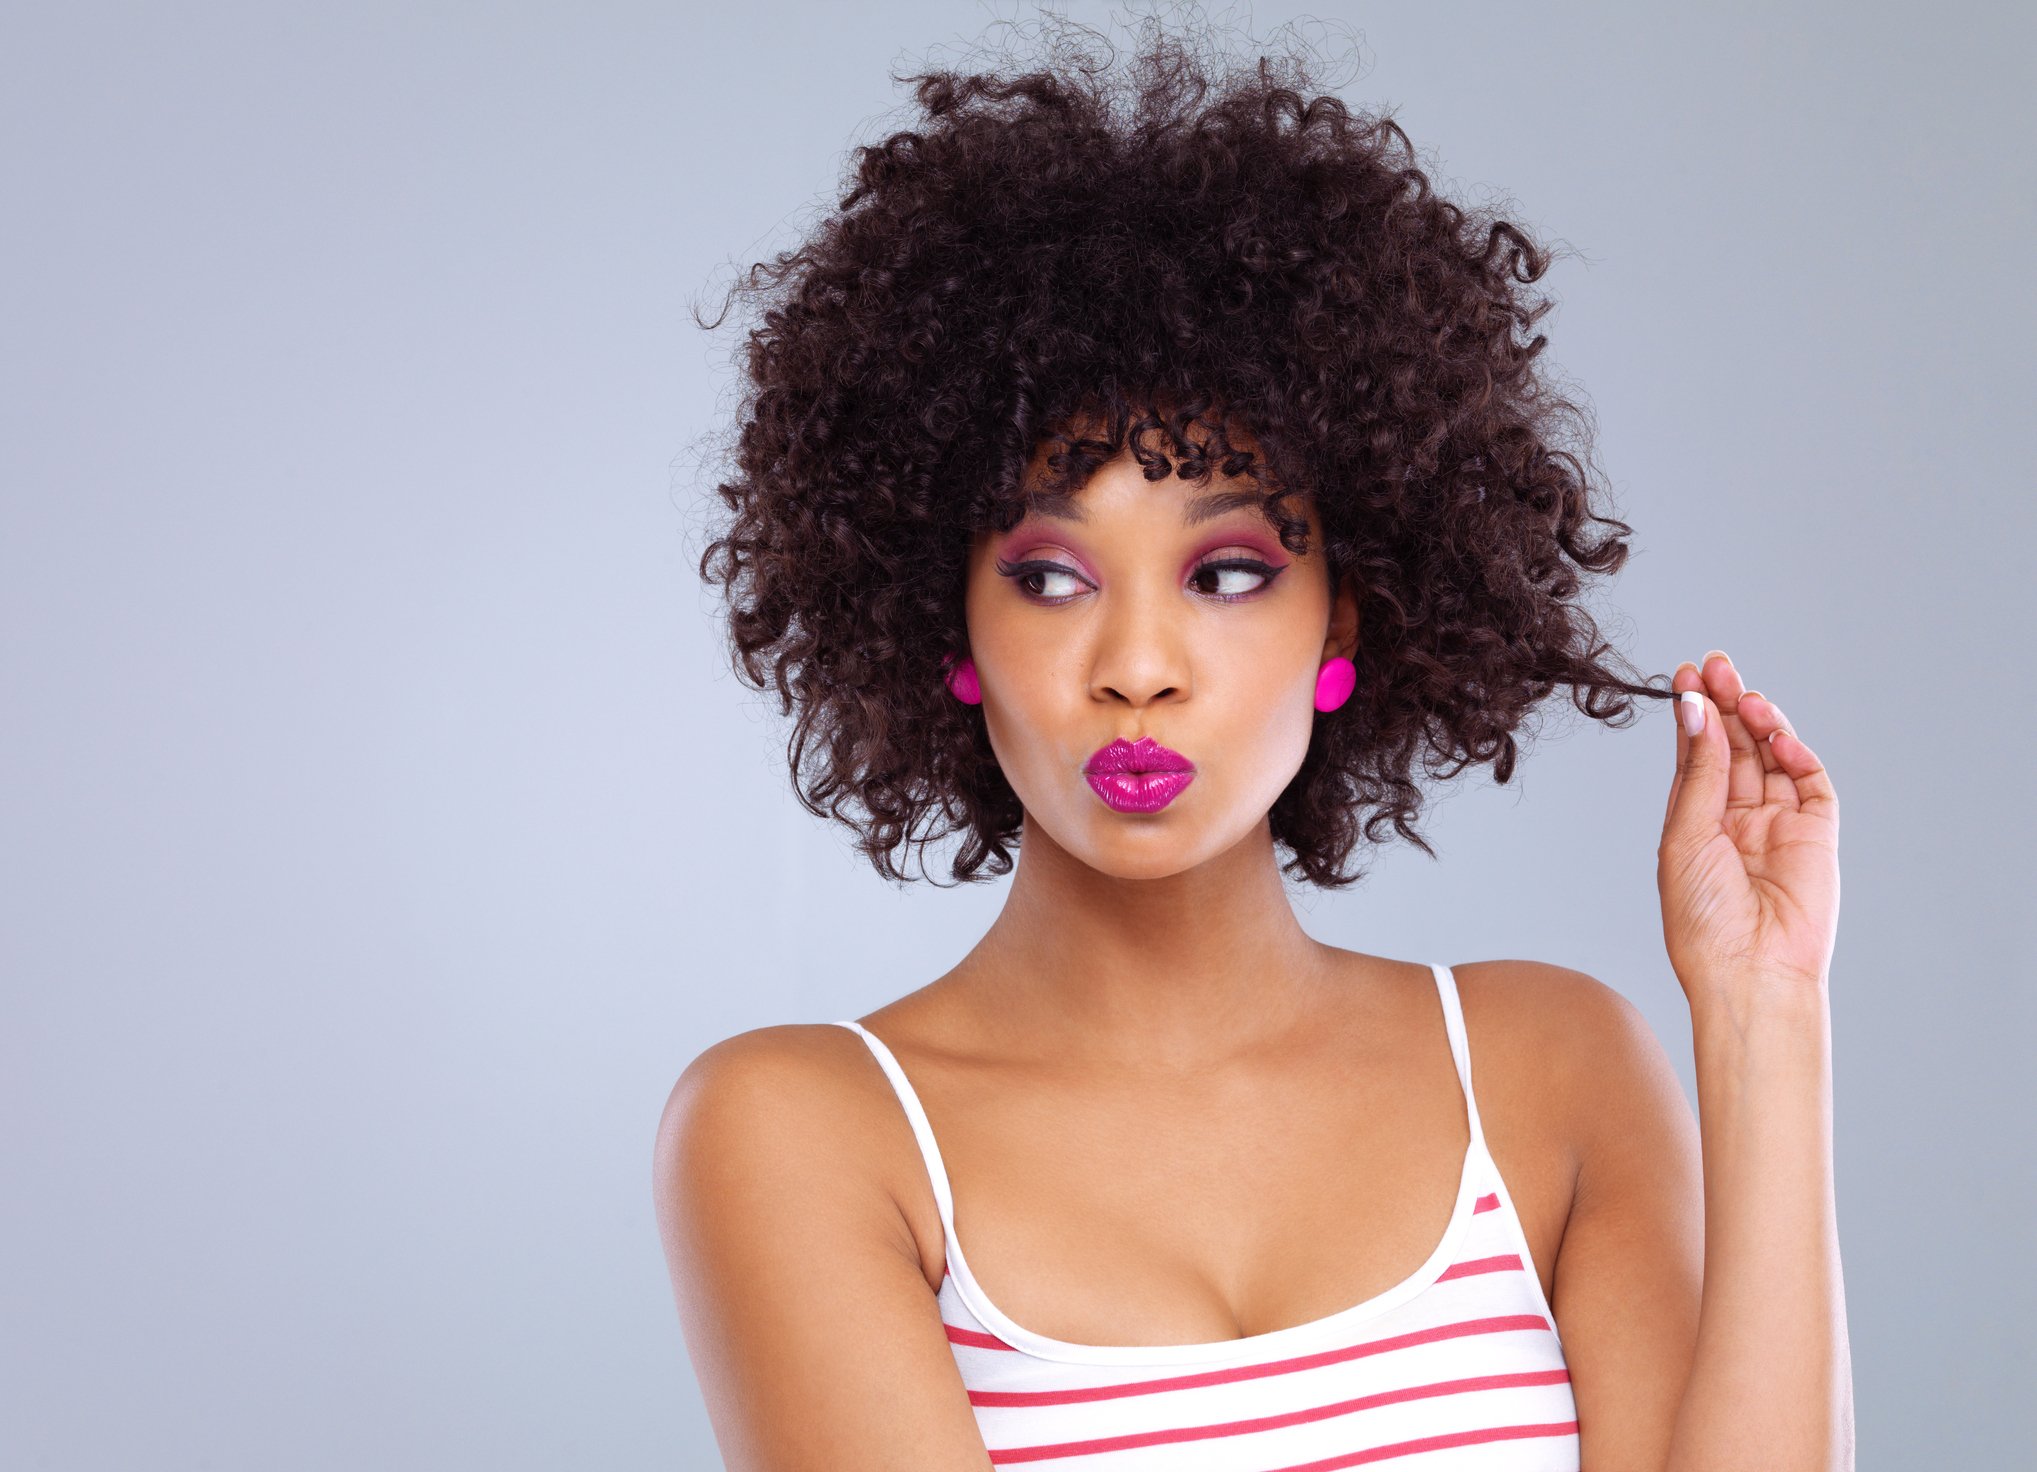 4 Bogus Stereotypes You Might Believe About Openly Sexual Women Everyday Feminism 